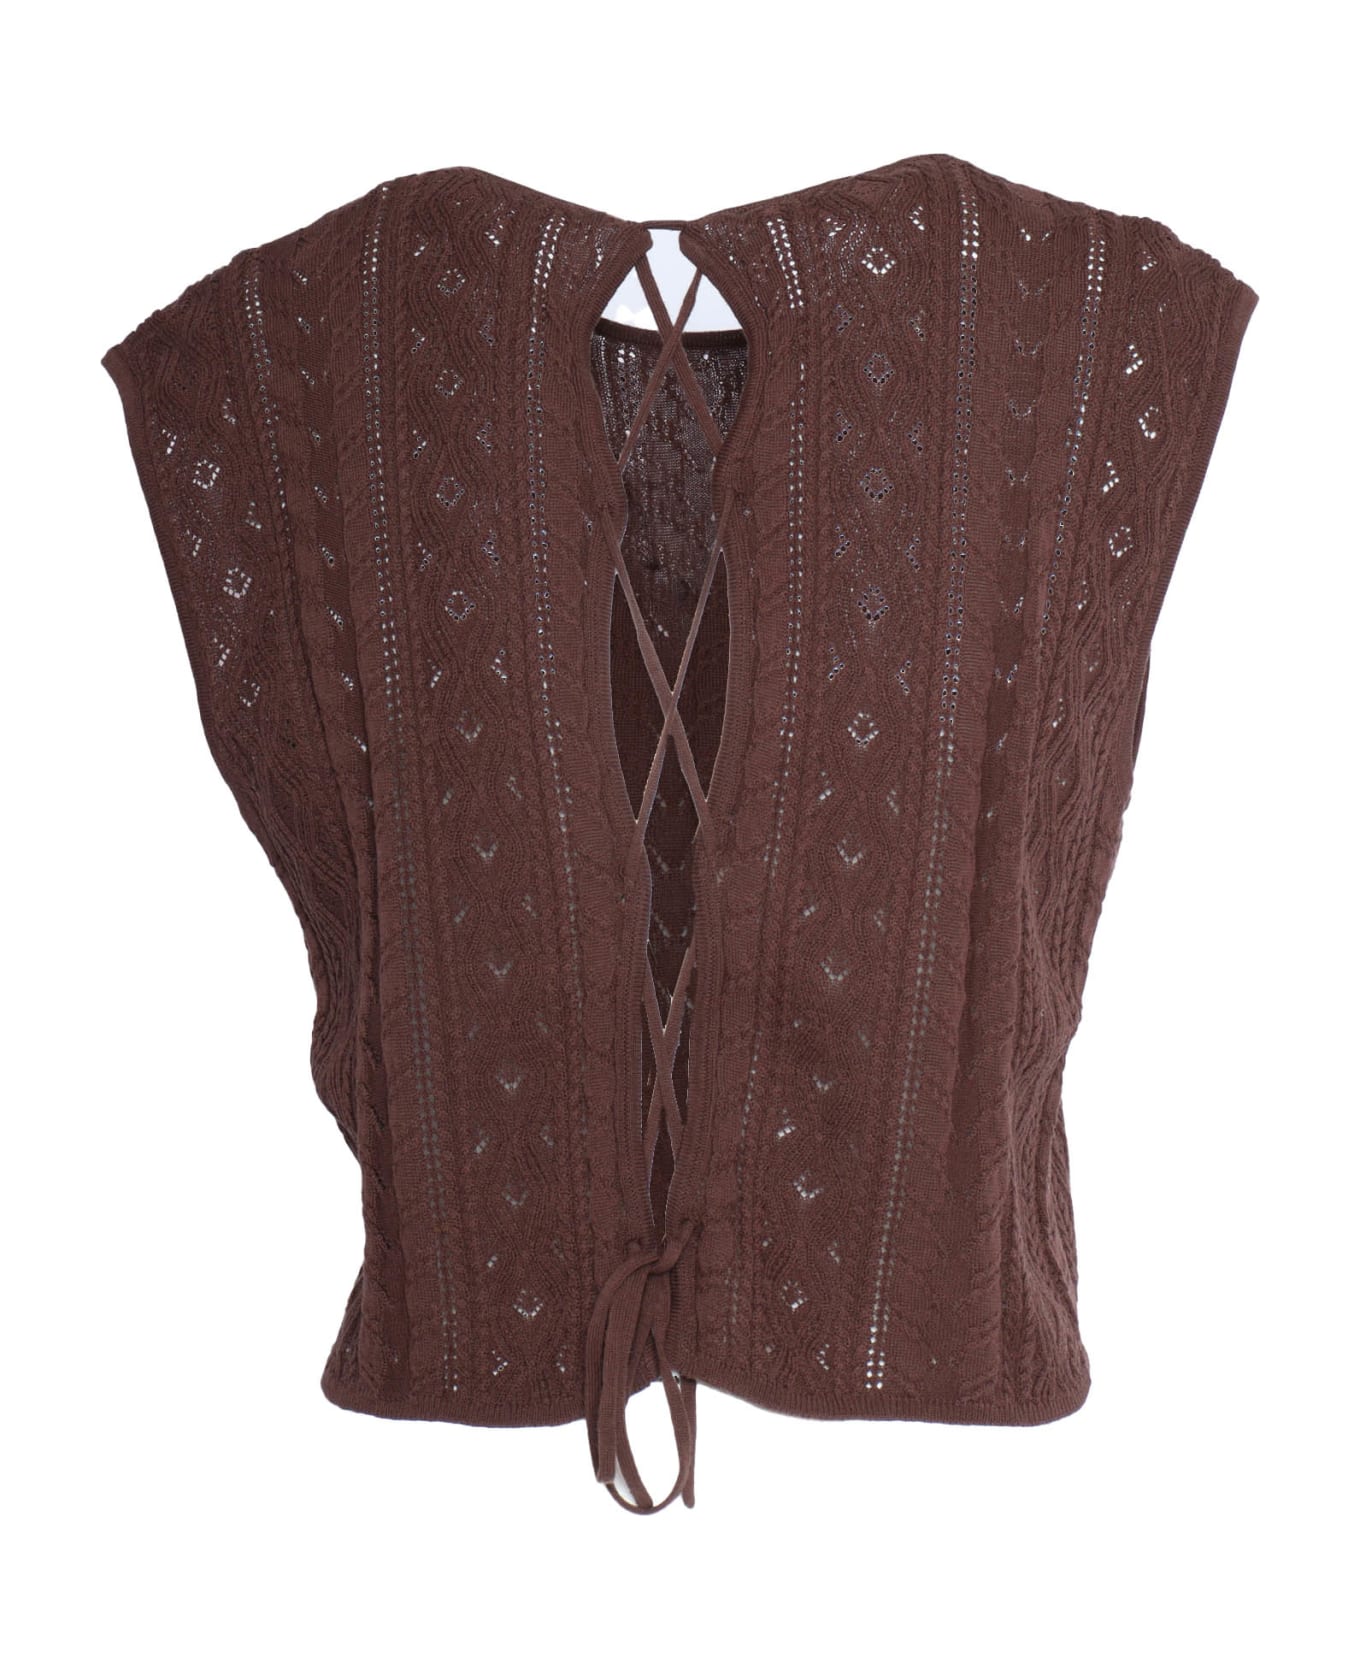 Ballantyne Brown Perforated Top - BROWN ブラウス